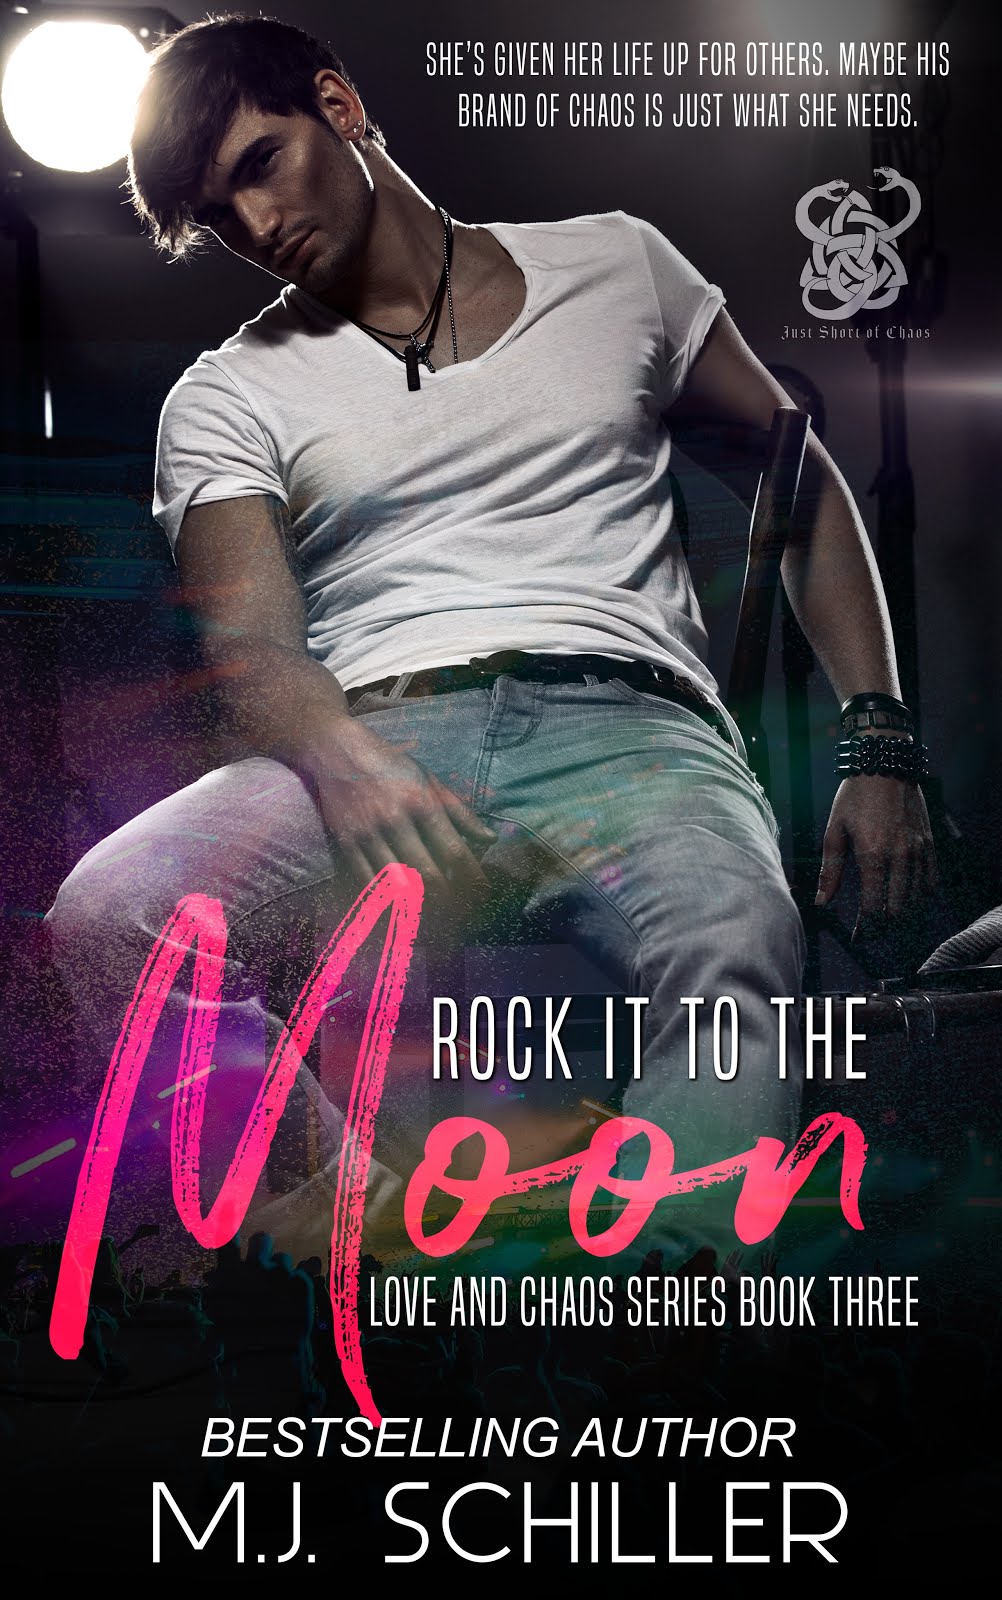 ROCK IT TO THE MOON